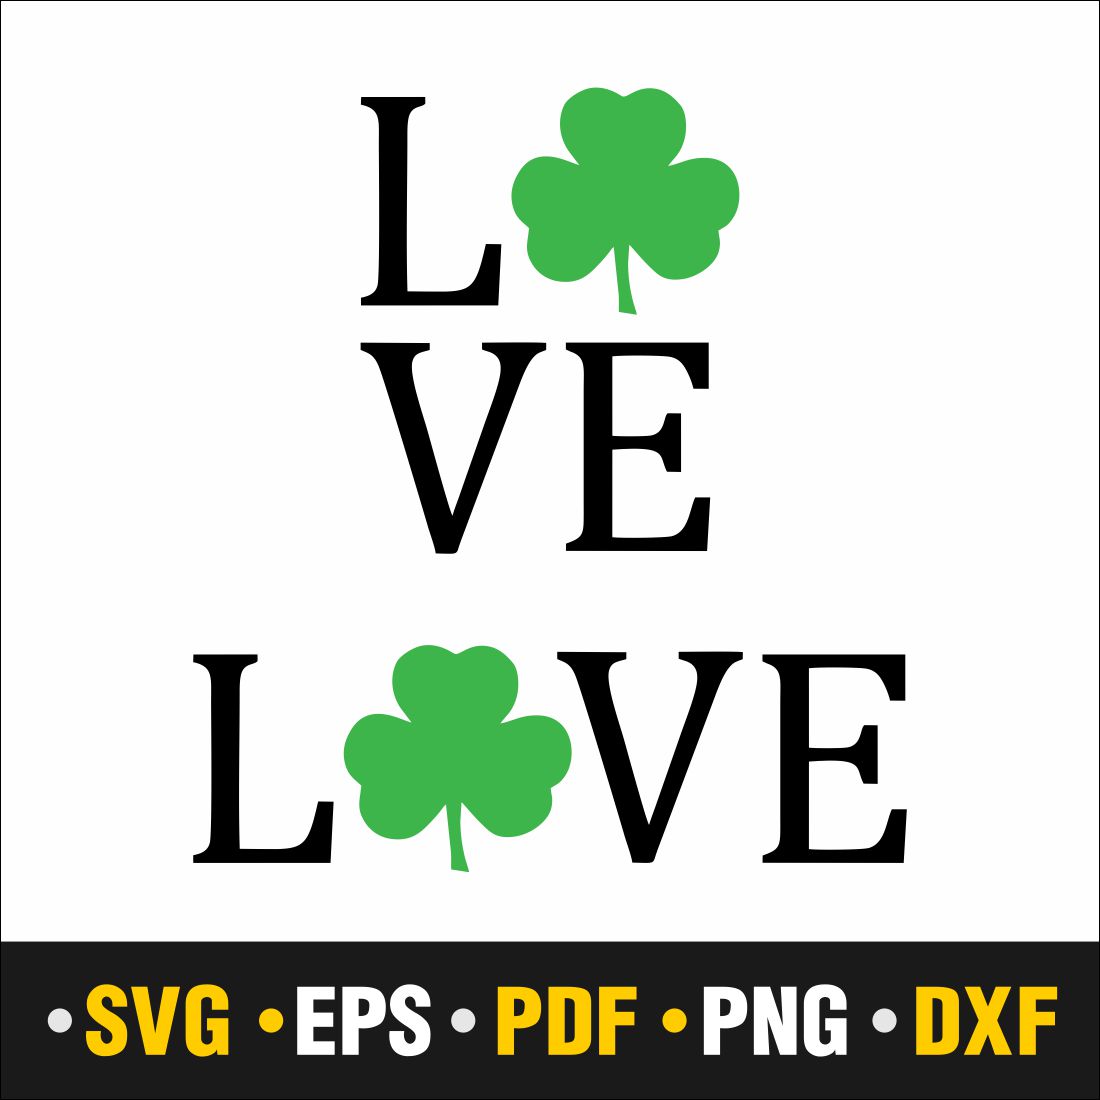 St Patrick's day Svg, St Patrick's Love , St Patrick's day Love Svg, St Patrick's day Png, St Patrick's Png, Love Svg, Instant Download Vector Cut file Cricut, Silhouette, Pdf Png, Dxf, Decal cover image.